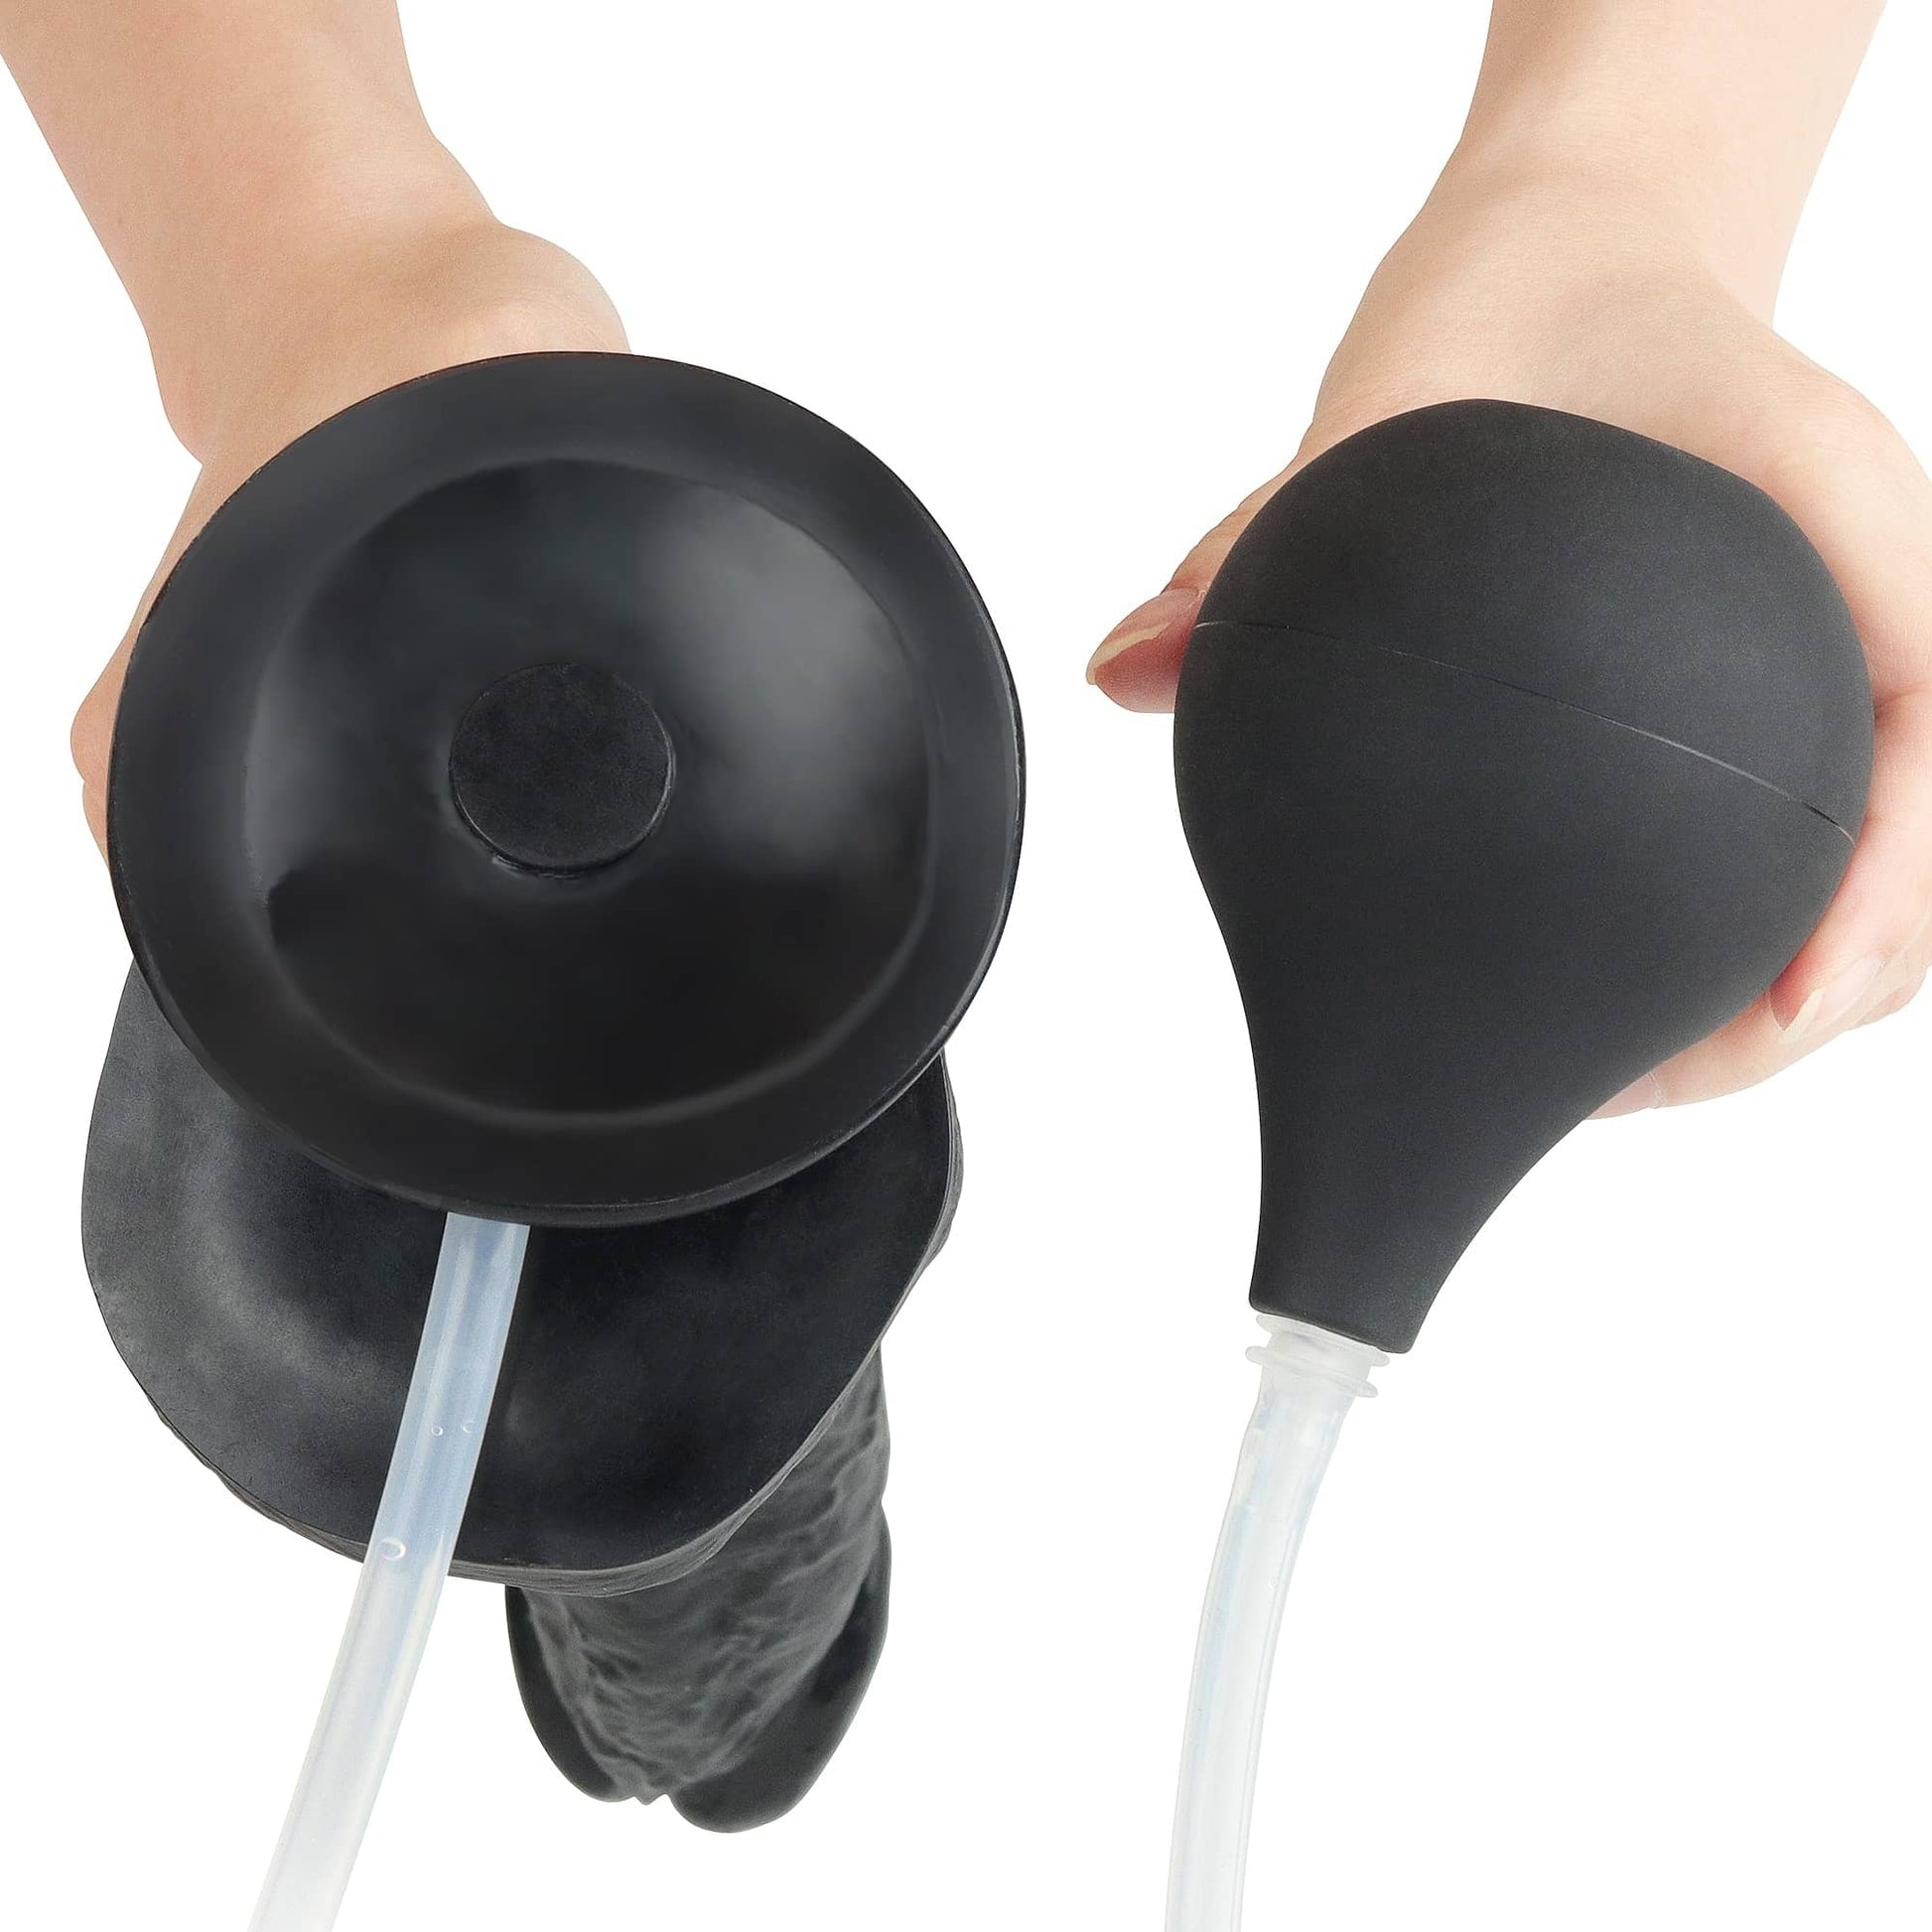 The suction cup and the enema bulb of the 11 inches black realistic ejaculating dildo